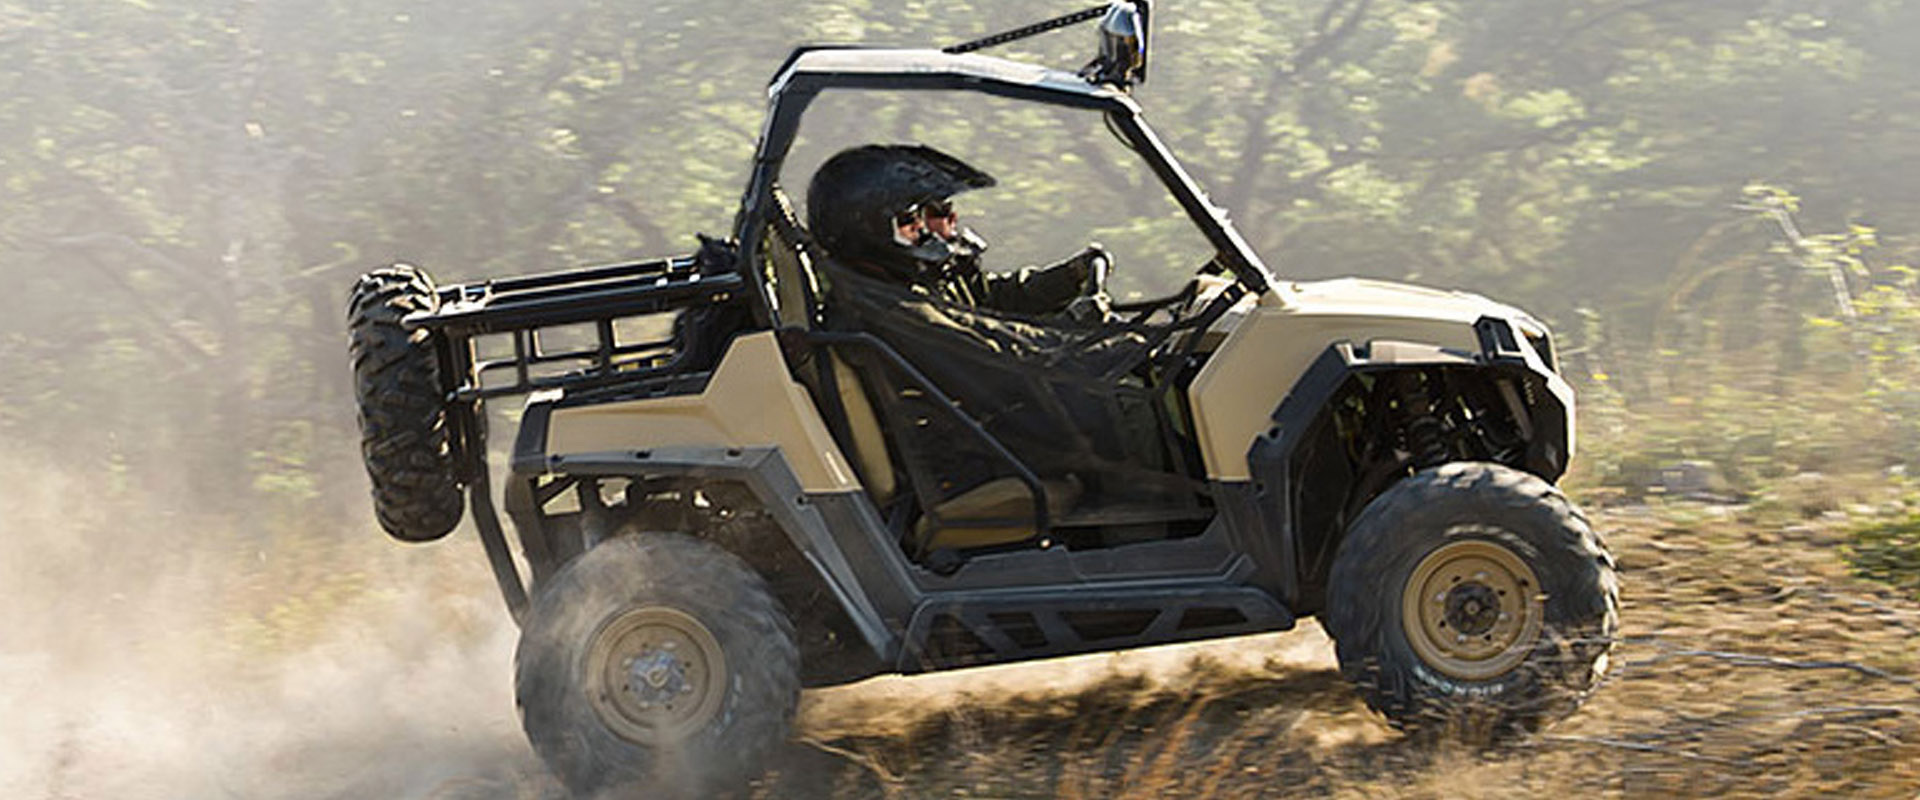 Rzr SW Government and Military ATV Vehicle sw in Mumbai, Banglore
